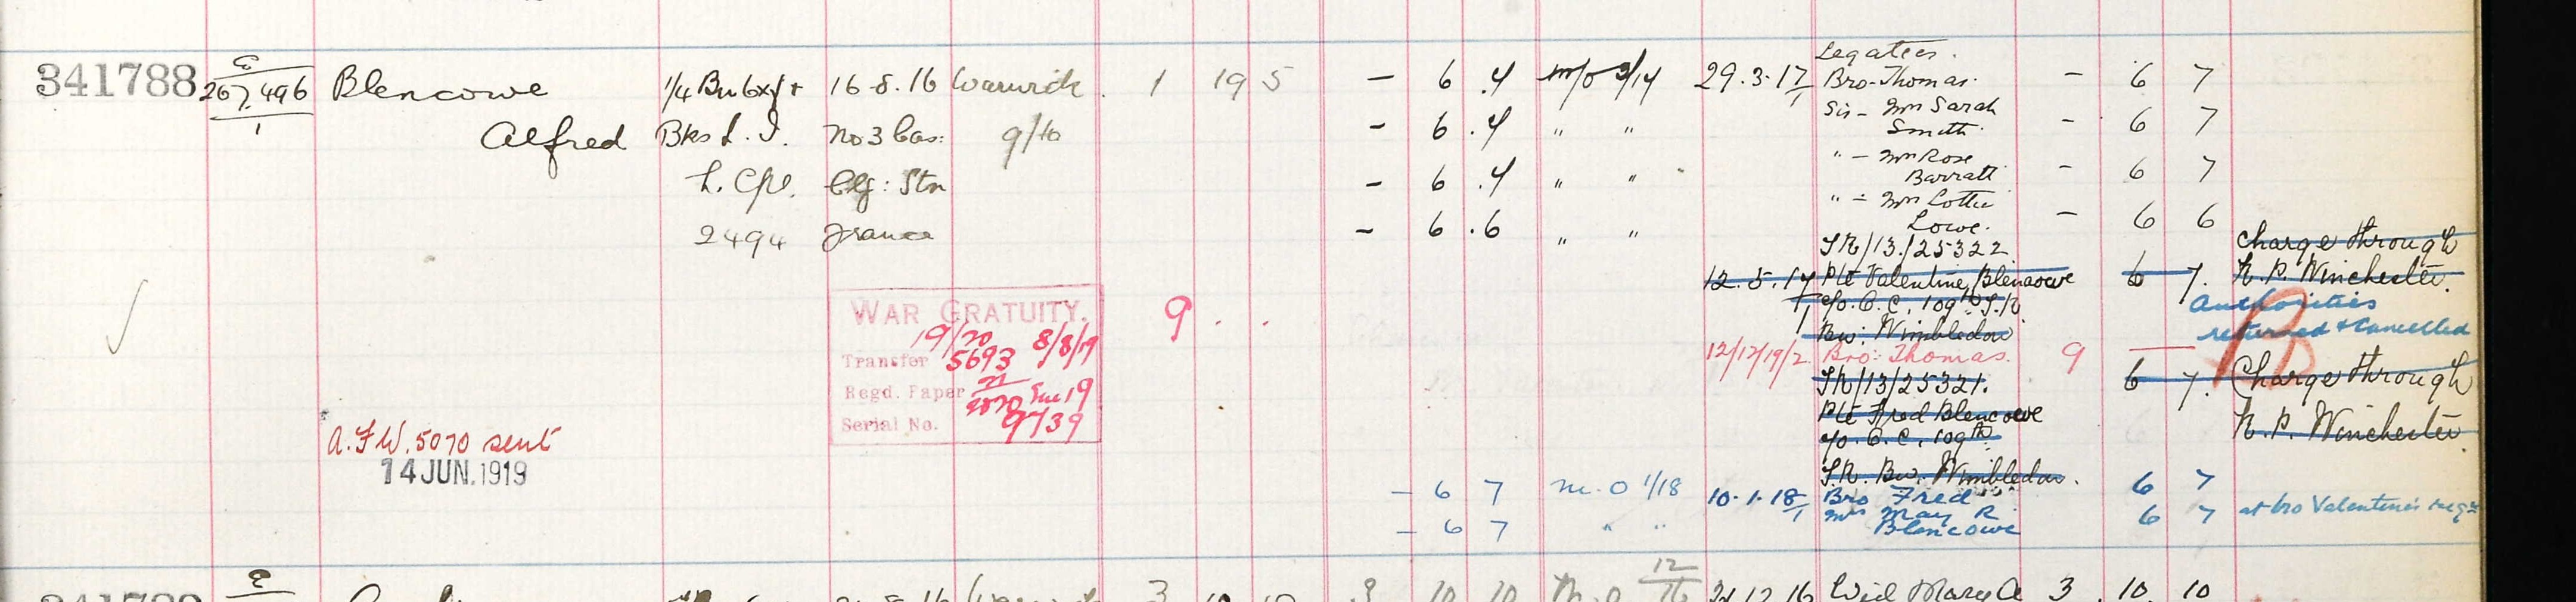 The Soldiers Effects Sheet for brother Alfred KIA 1916 shows Thomas was left nine pounds from his war payments The sheet confirms 16th Aug. Died three days after being wounded and at the No 3. Casualty Clearing Station at Puchevillers. effects left to sisters Sarah Smith,Rose Barrett, Lottie Lowe. Brother Pte Valentine c/o O.C. 109th Kings Rifles Bn Wimbledon Brother Thomas Brother Pte Fred Blencowe c/o O.C.109th Kings Rifles Bn Wimbledon Mrs May R Blencowe sister in law